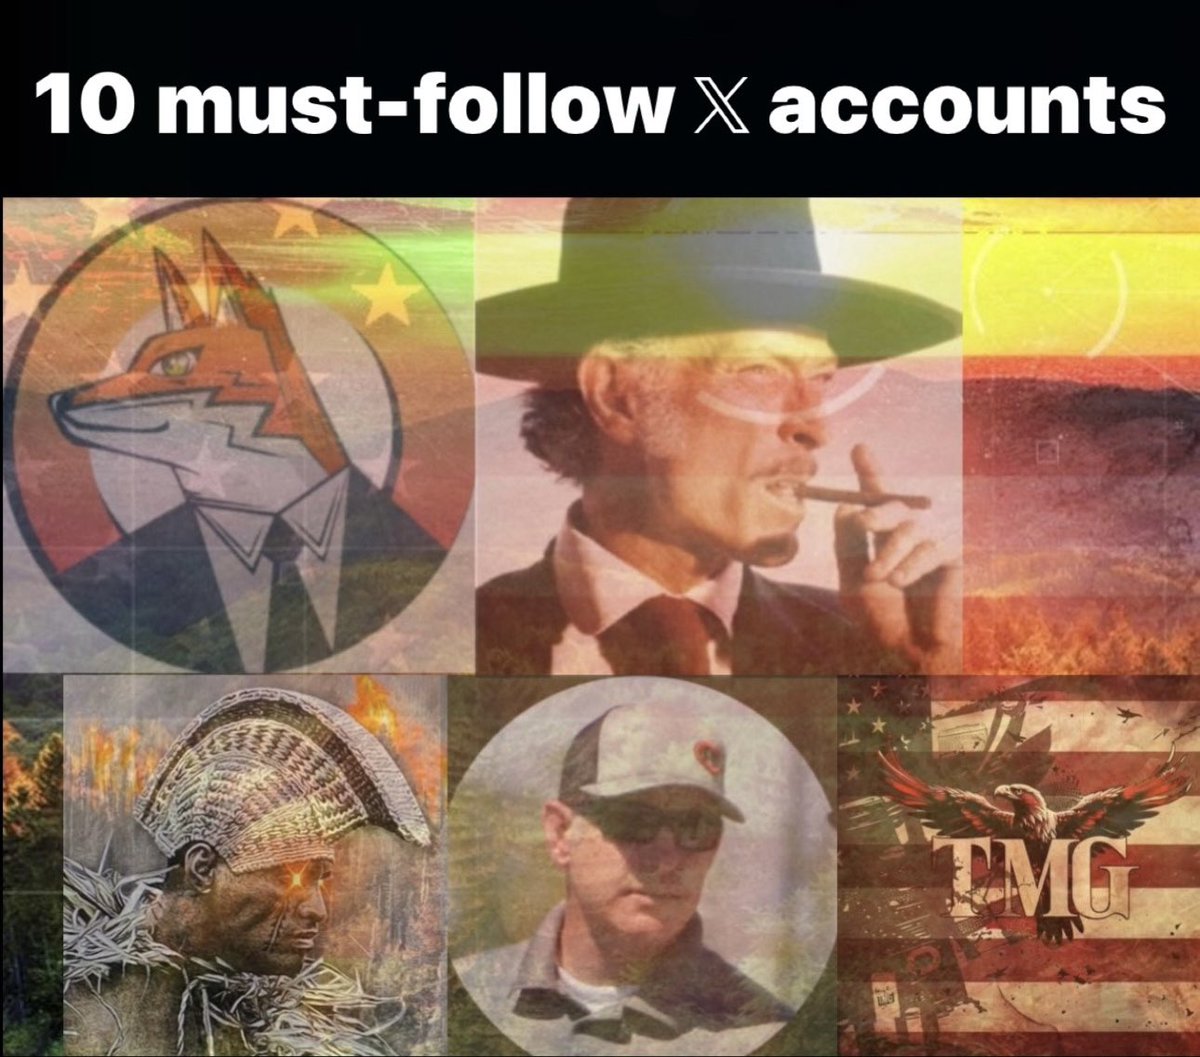 100k supporters of freedom! 🎉 Along the way, I’ve been fortunate enough to connect with many like-minded individuals. This is great opportunity to share some must-follow 𝕏 accounts who have helped make this journey possible. 🧵…